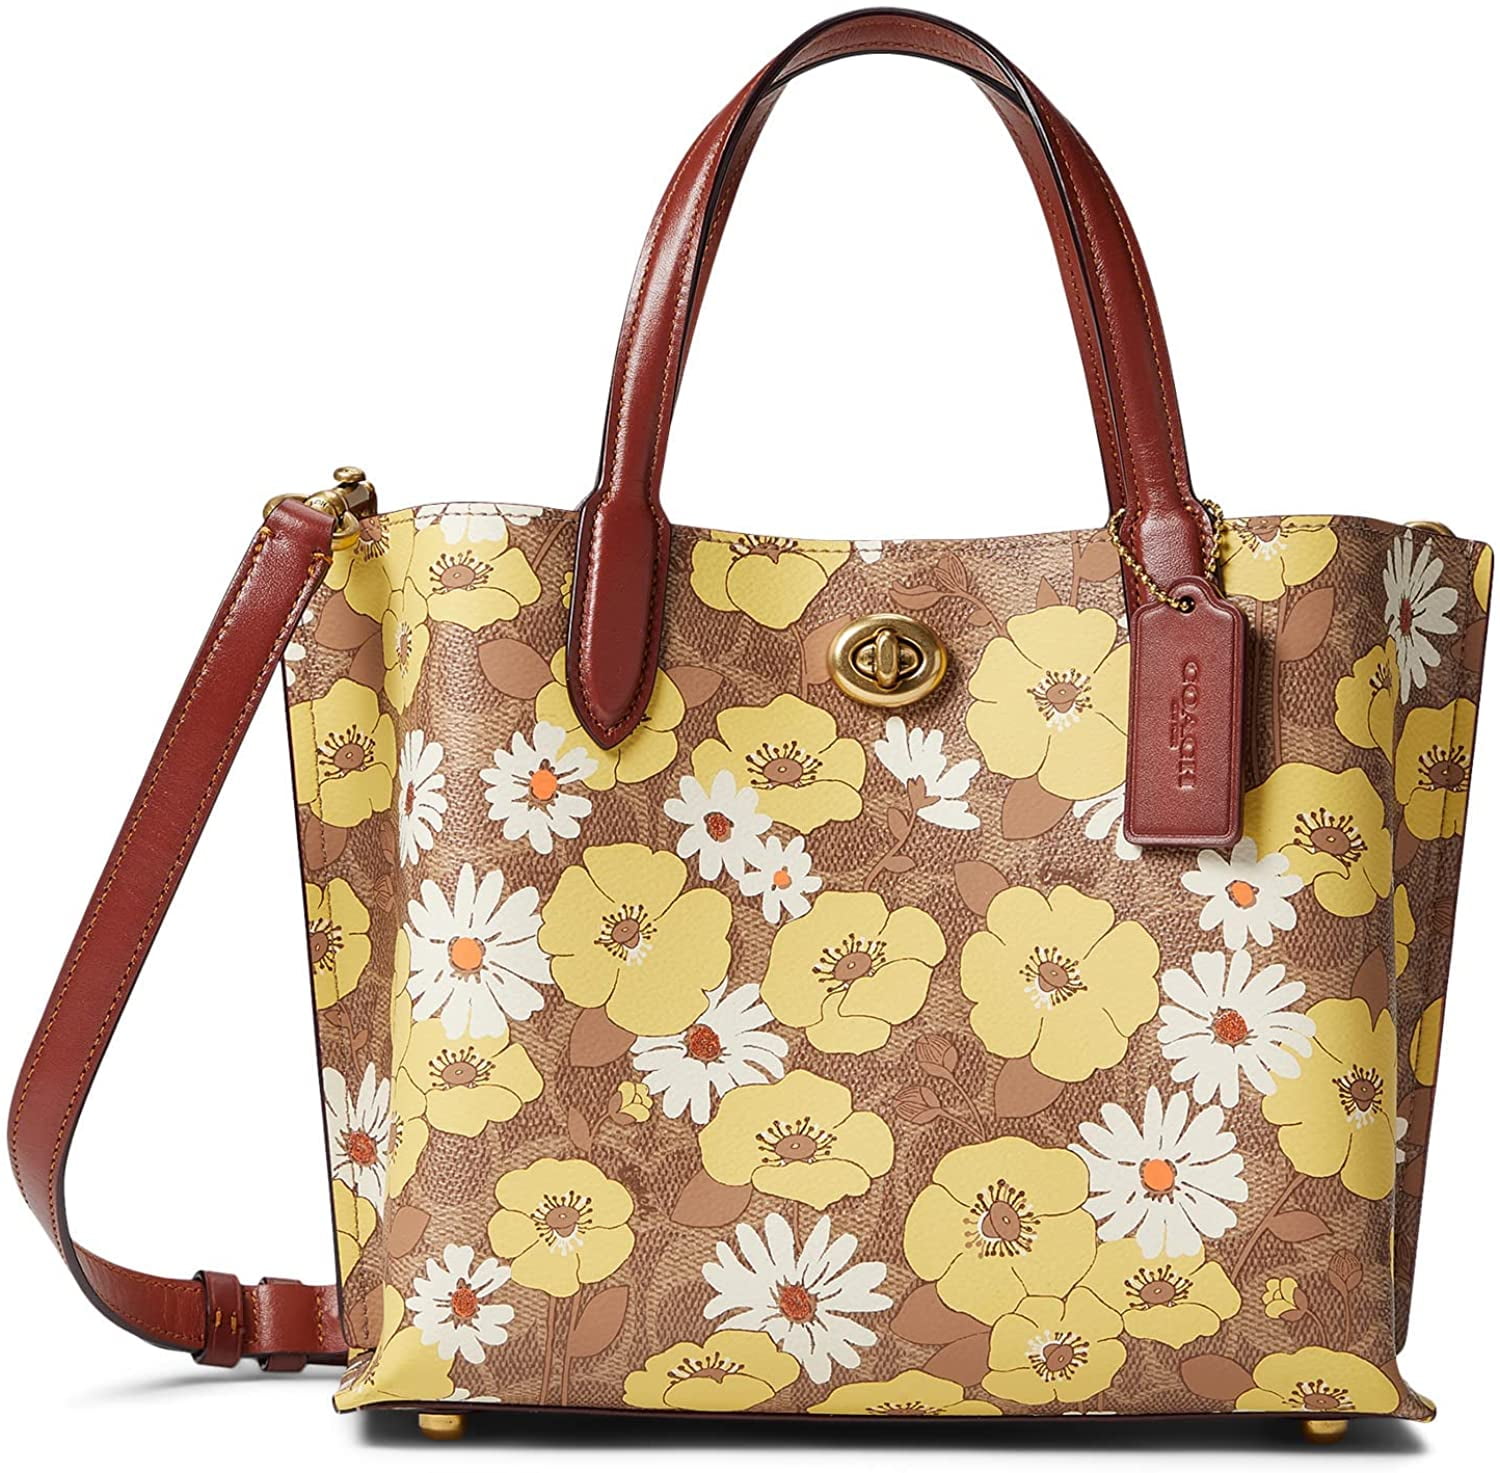 COACH Coated Canvas Signature Taylor Tote Tan Rust One Size CC402